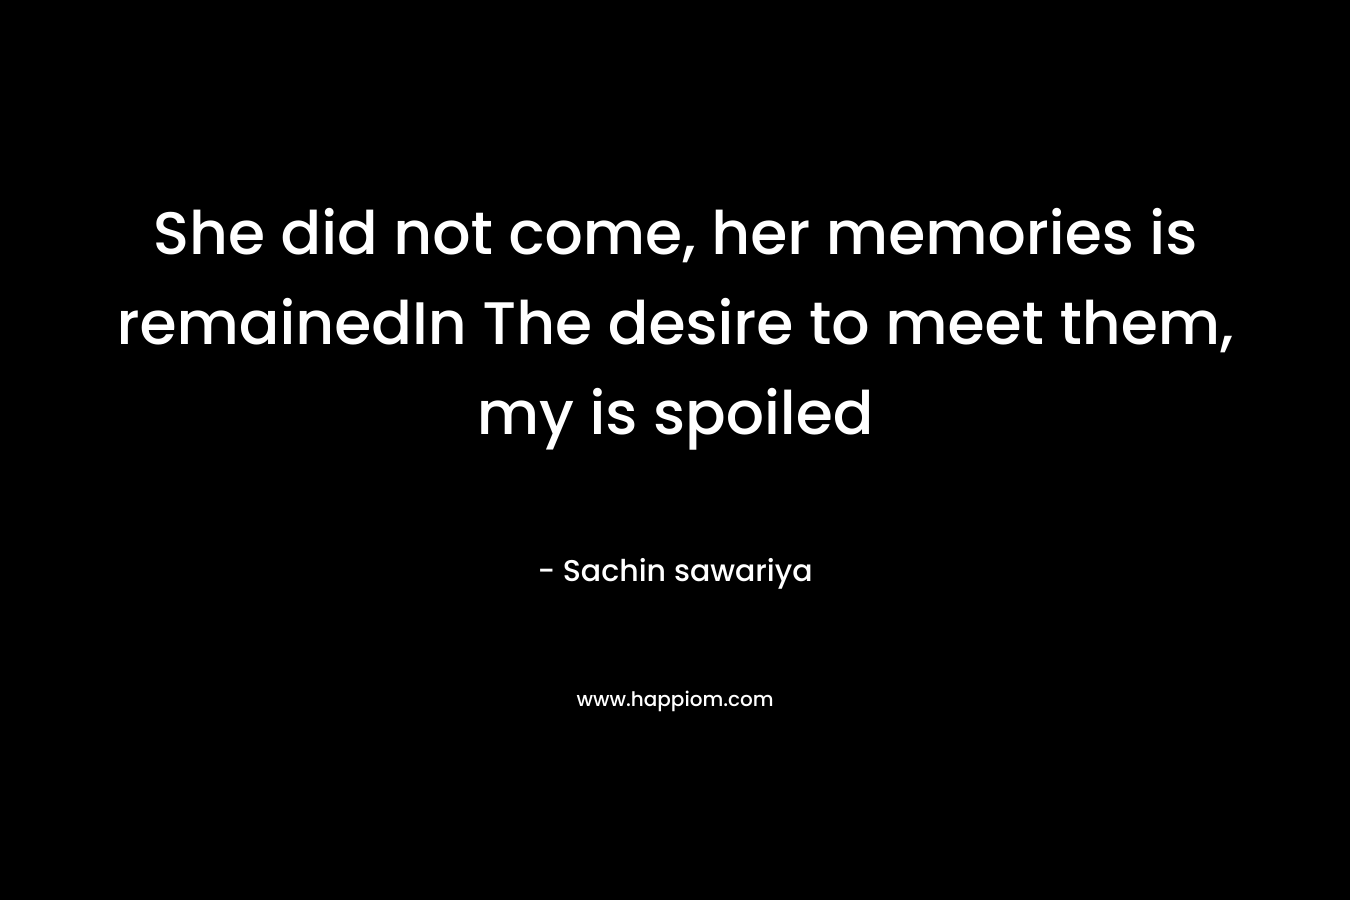 She did not come, her memories is remainedIn The desire to meet them, my is spoiled – Sachin sawariya